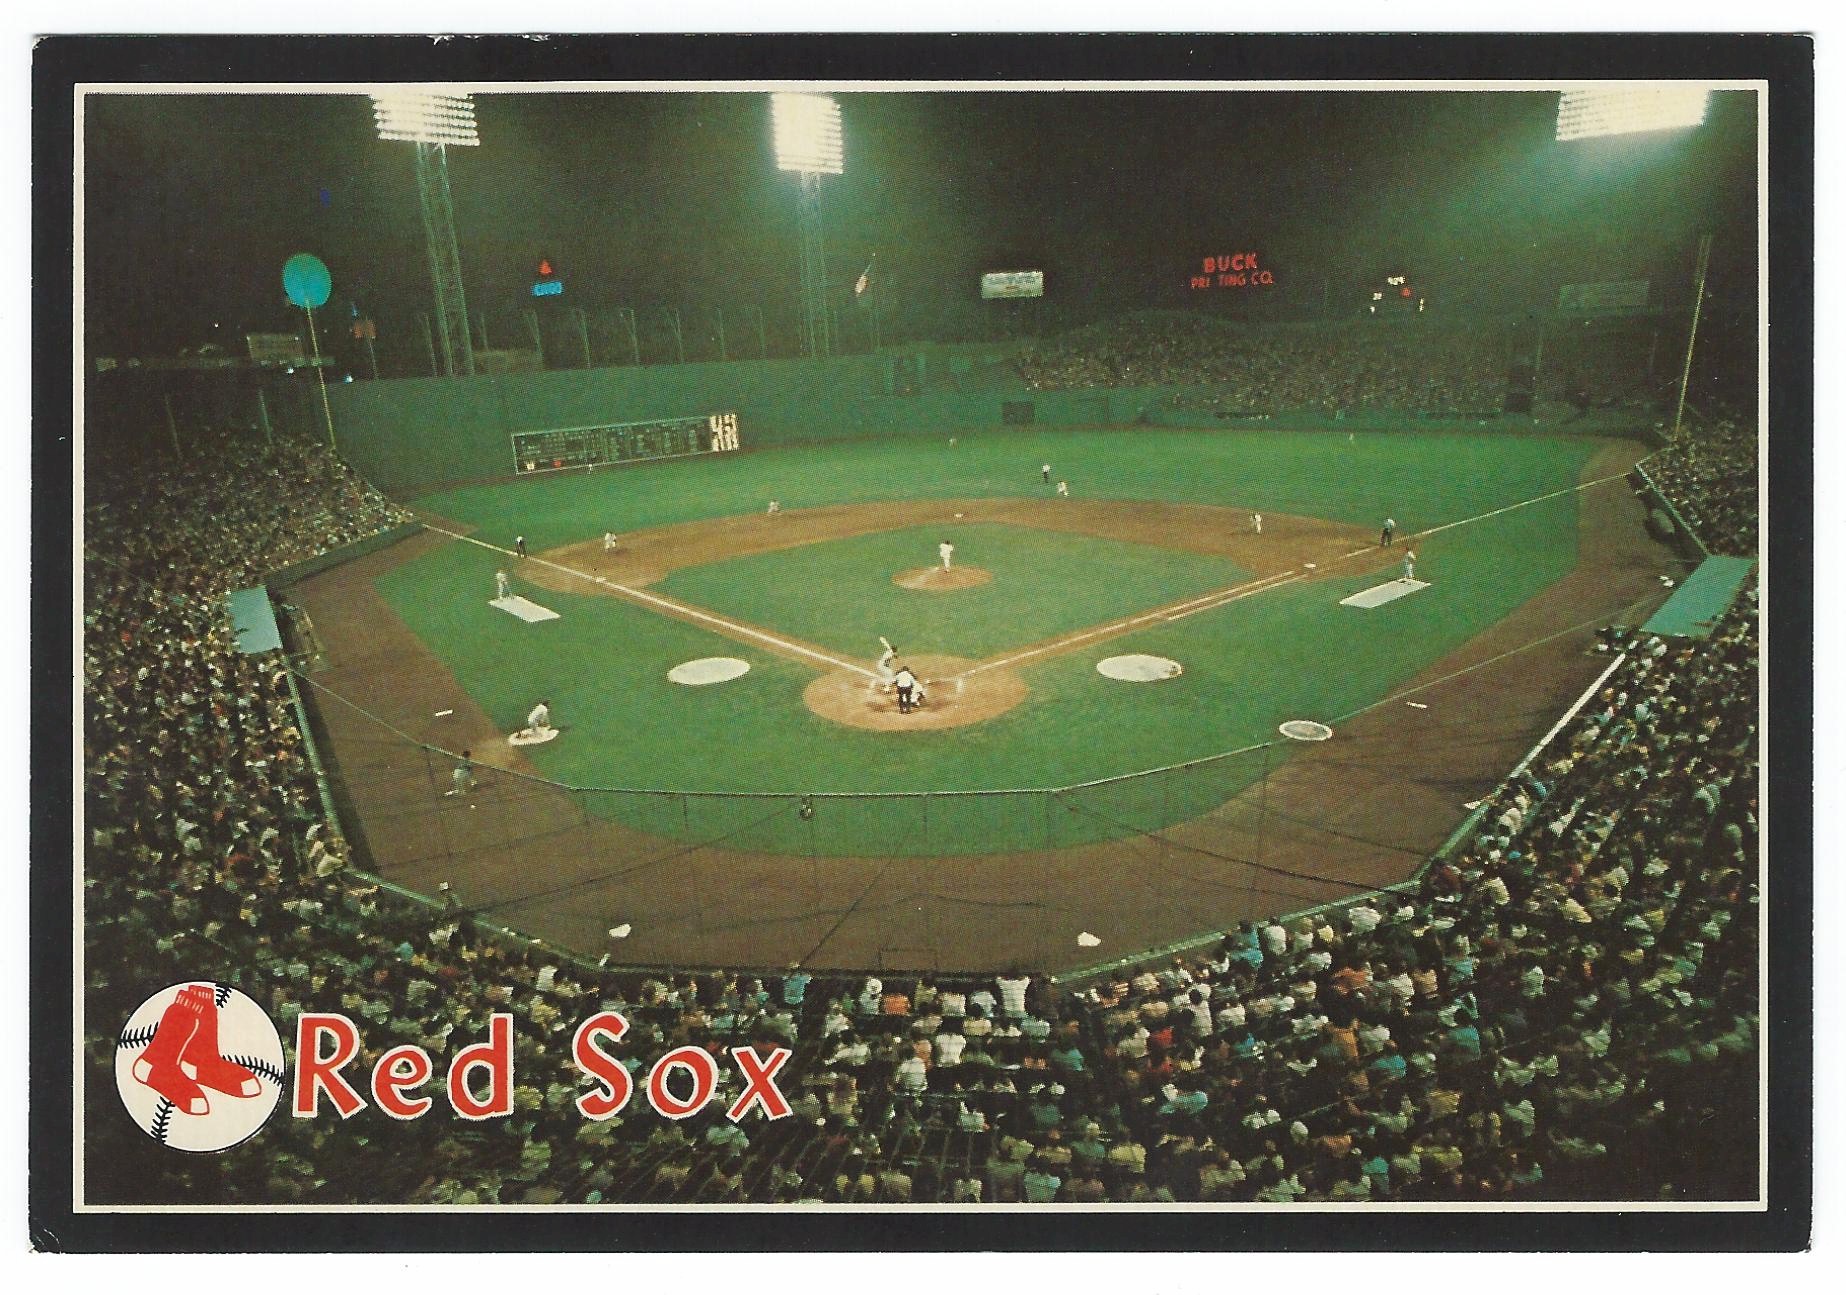 RED SOX NIGHT BASEBALL FENWAY PARK POSTCARD UNUSED 12483-D (MA) [PC6494] -  $2.95 : SEA THE LIGHTS, The Store at Sea The Lights